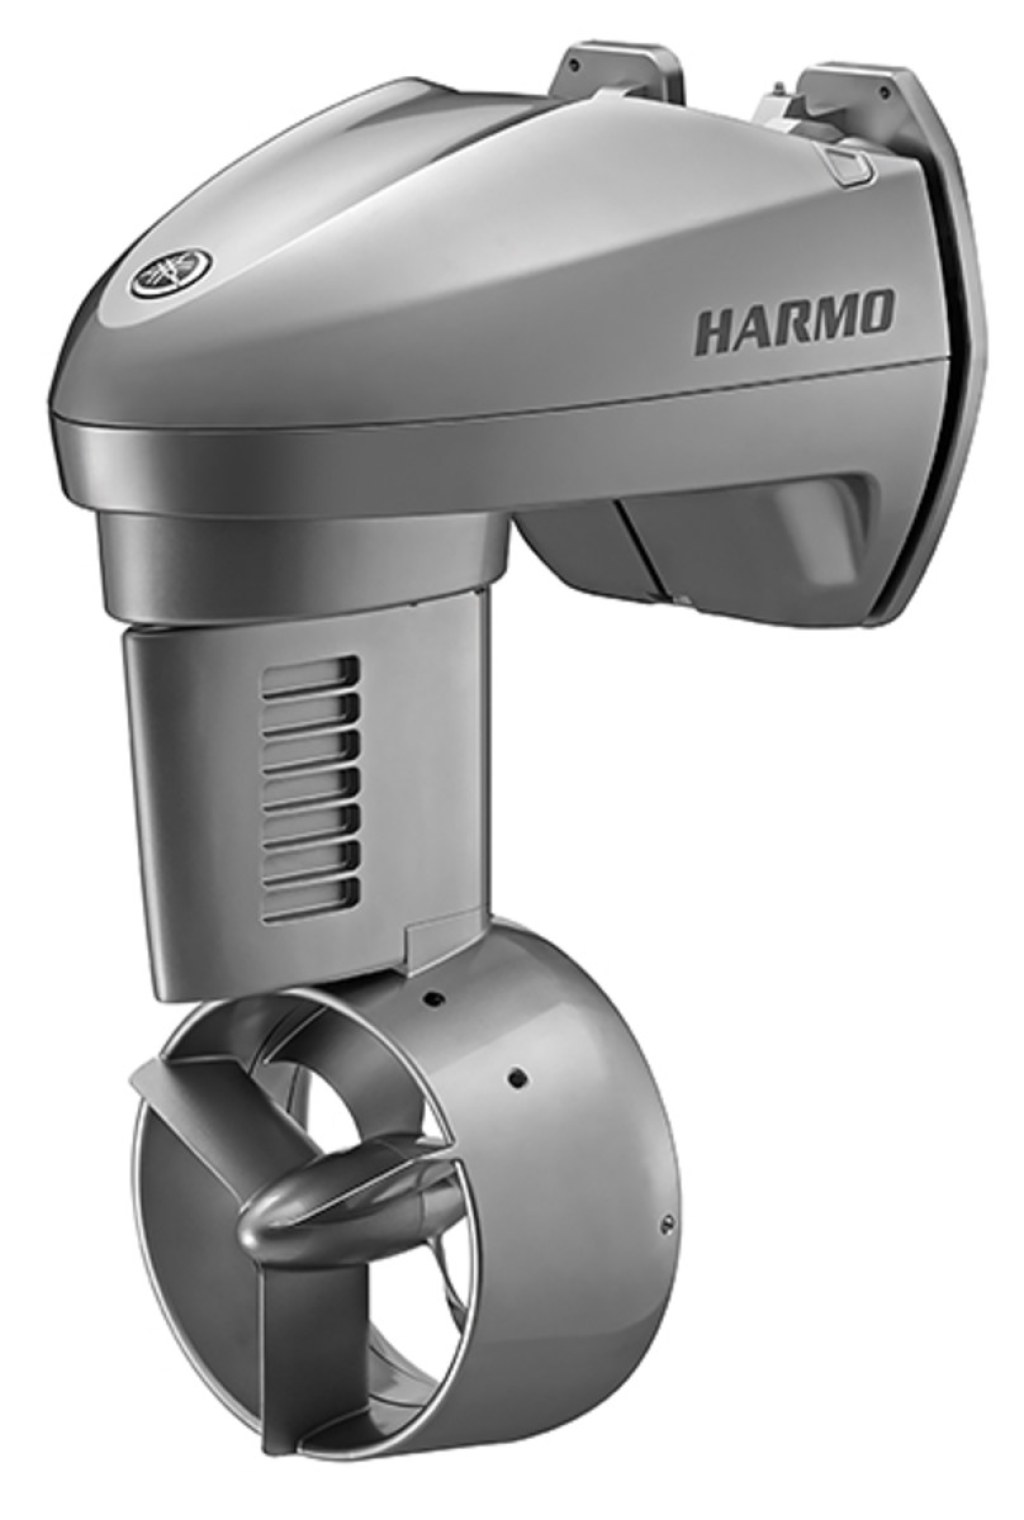 Picture of: Review: HARMO Electric Boat Motor from Yamaha – Power & Motoryacht